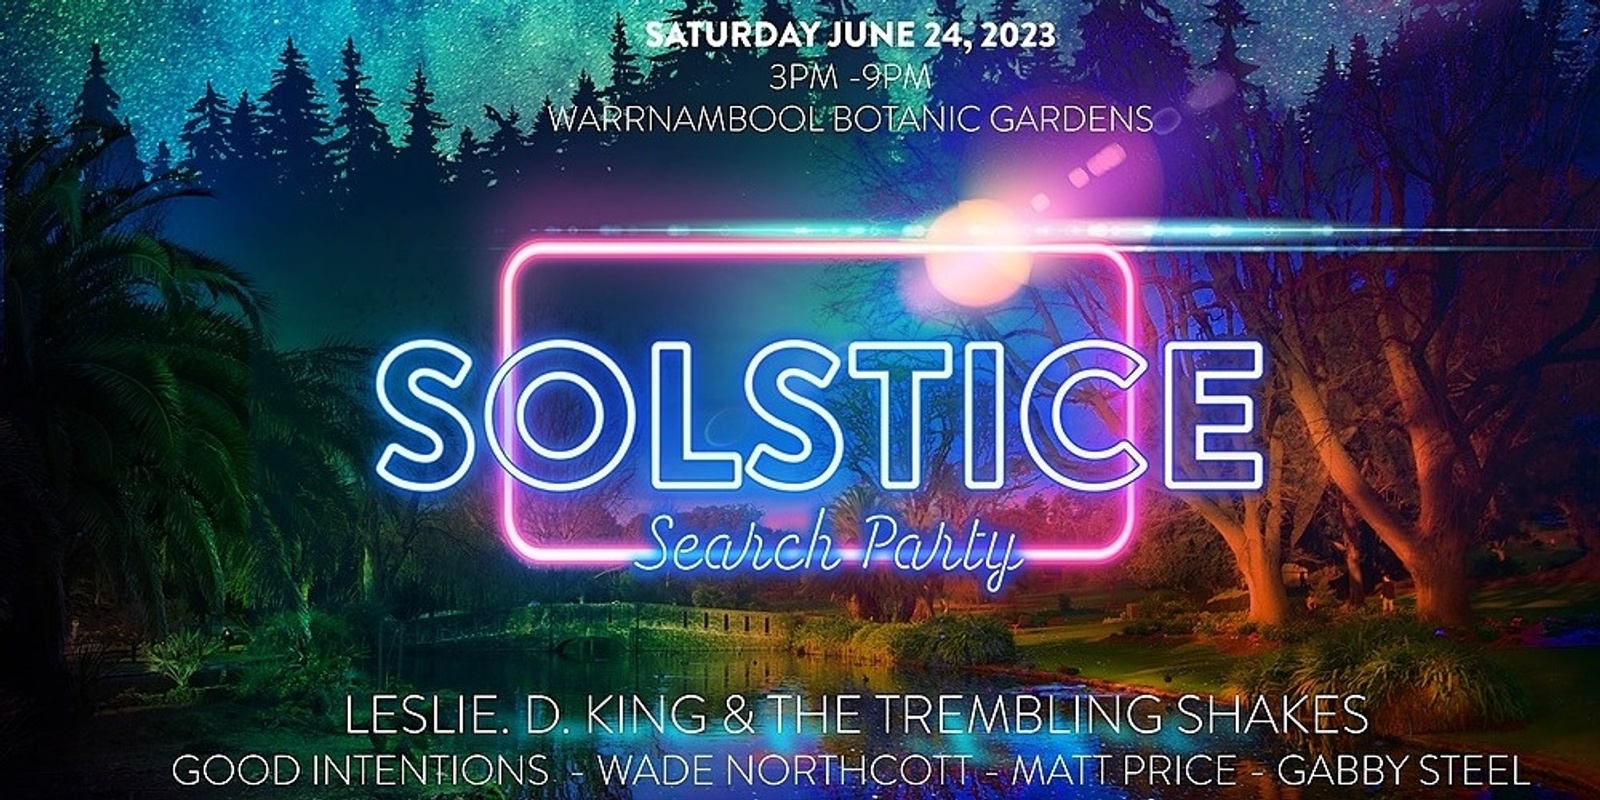 Banner image for Solstice Search Party 2023